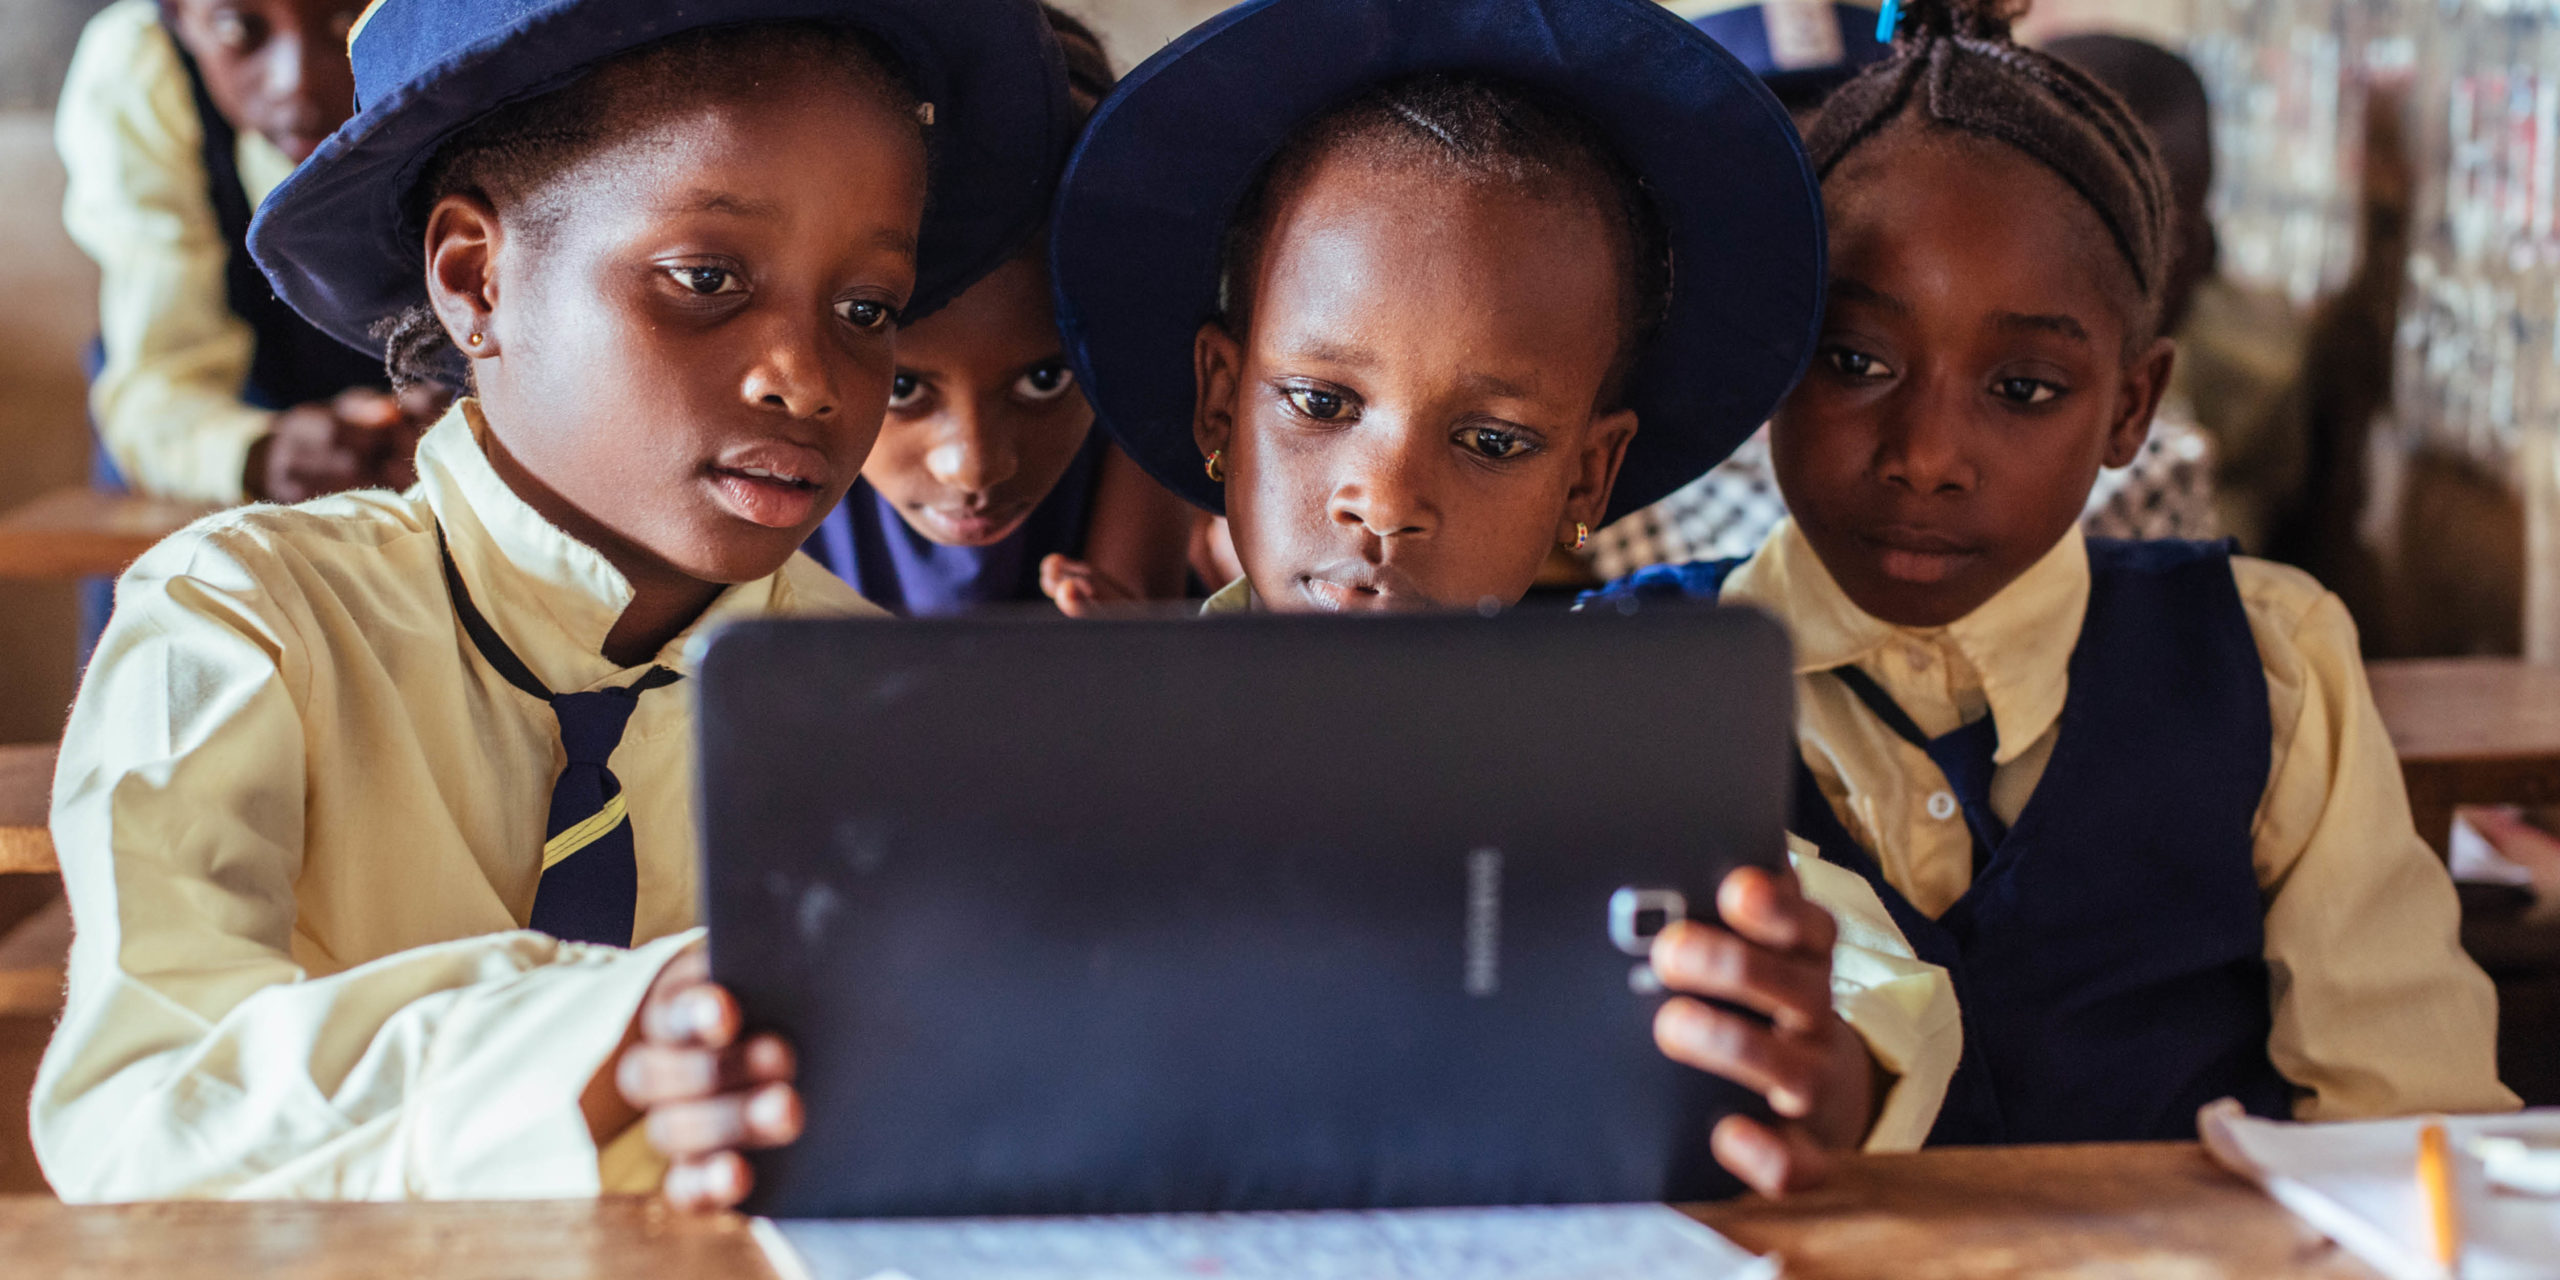 Does Education Technology Help Students in Low-Income Countries?